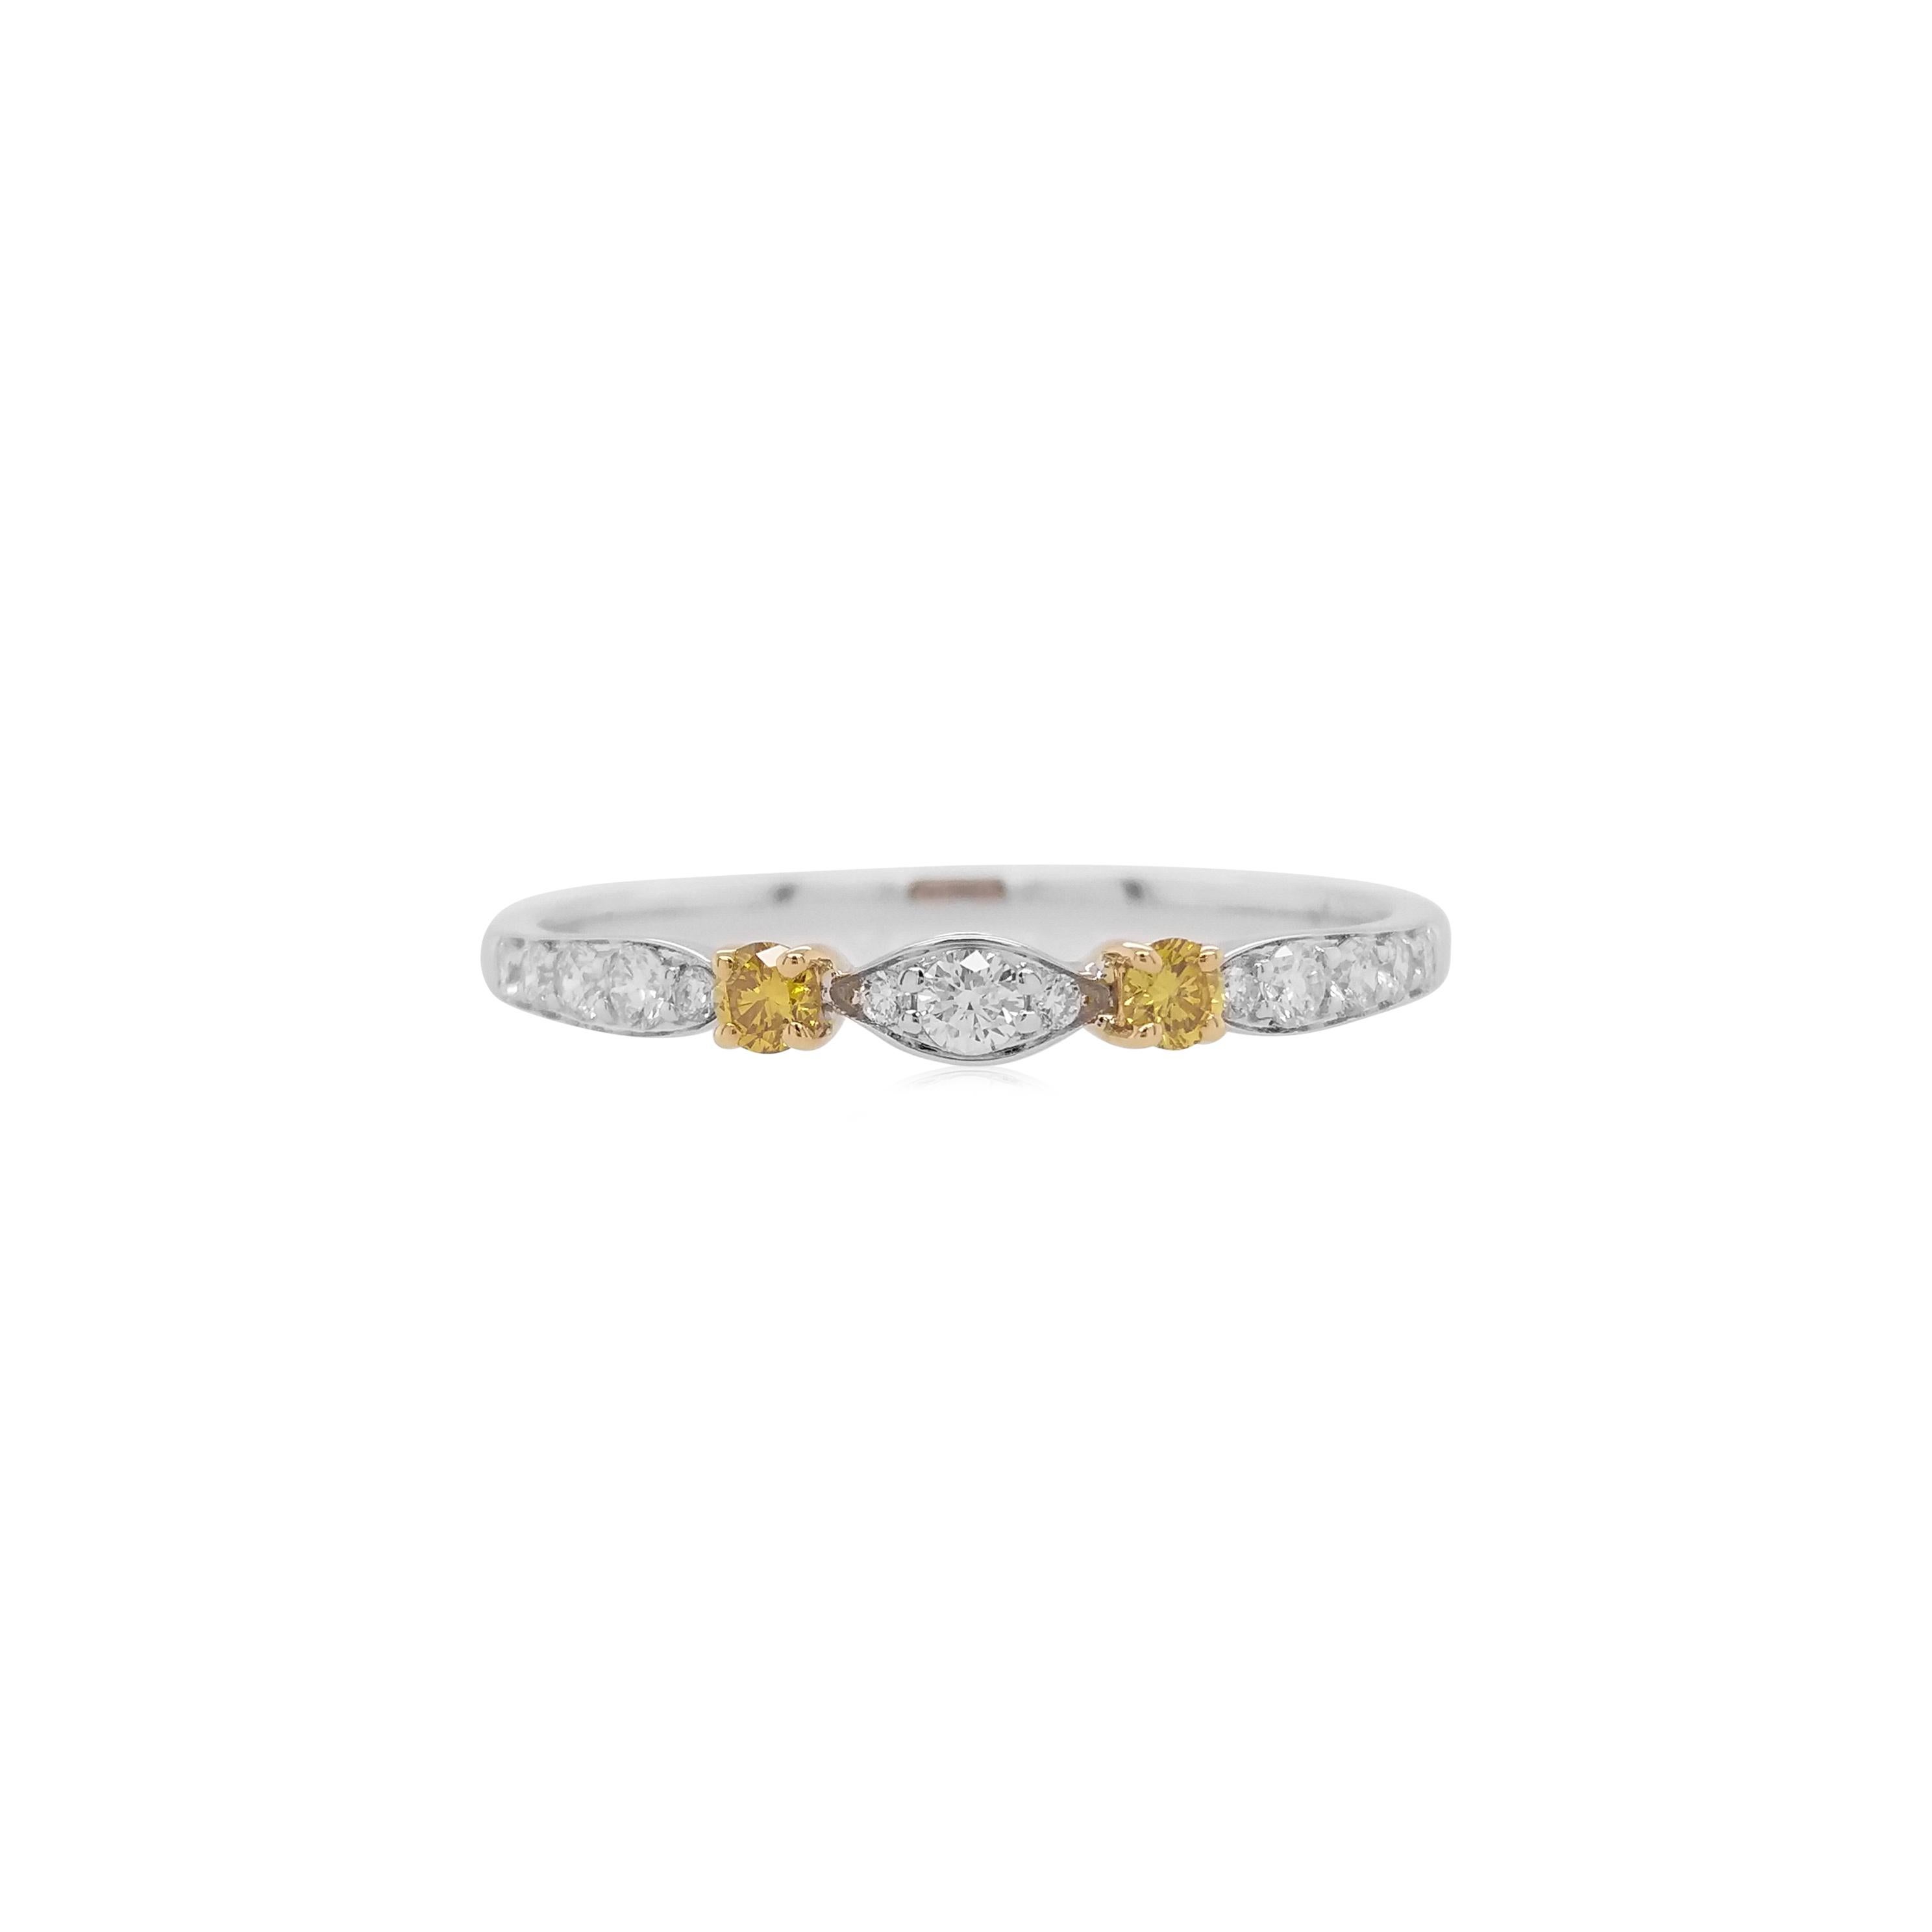 An elegant ring with round brilliant cut Yellow diamonds set in a band of white diamonds

Yellow Diamonds- 0.07 cts
White Diamond - 0.15 cts

HYT Jewelry is a privately owned company headquartered in Hong Kong, with branches in Tokyo, New York, and